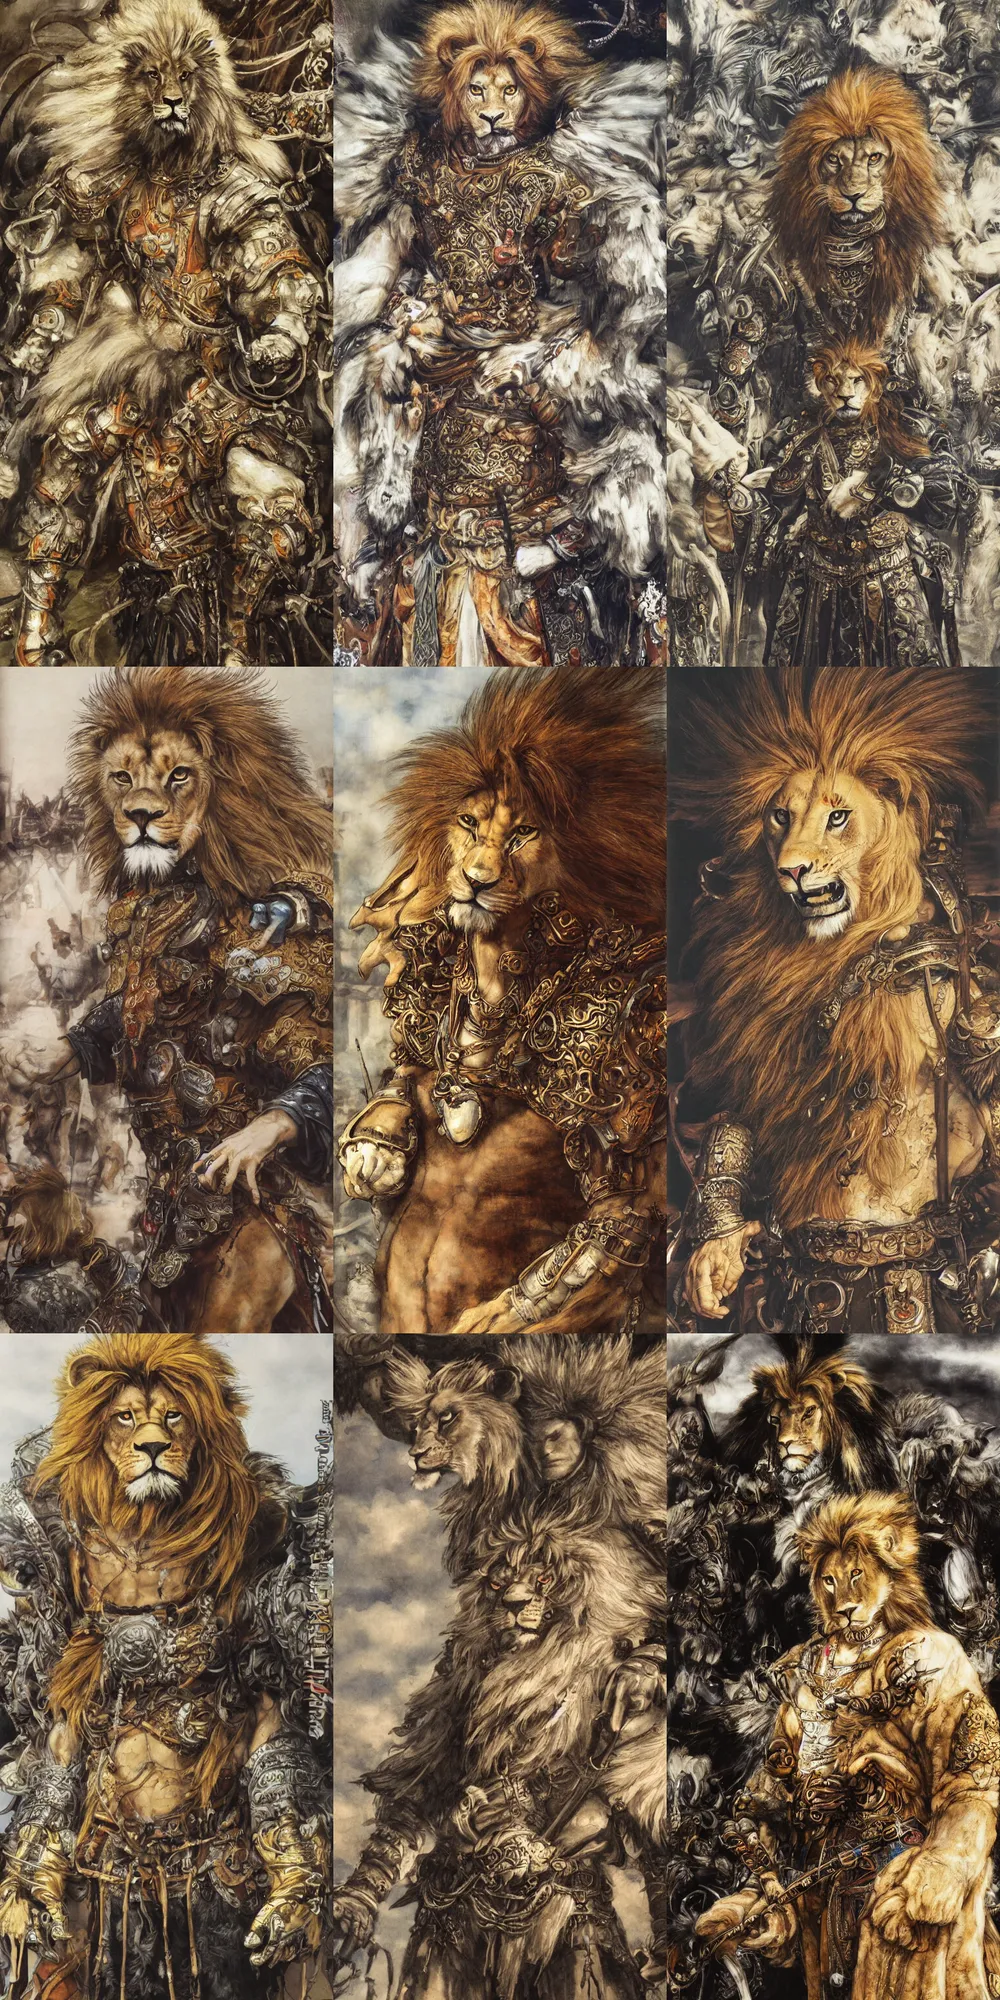 Image similar to 8 k yoshitaka amano painting of upper body of a young cool looking lion beastman with white mane at a medieval market at windy day. depth of field. he is wearing complex fantasy clothing. he has huge paws. renaissance style lighting.